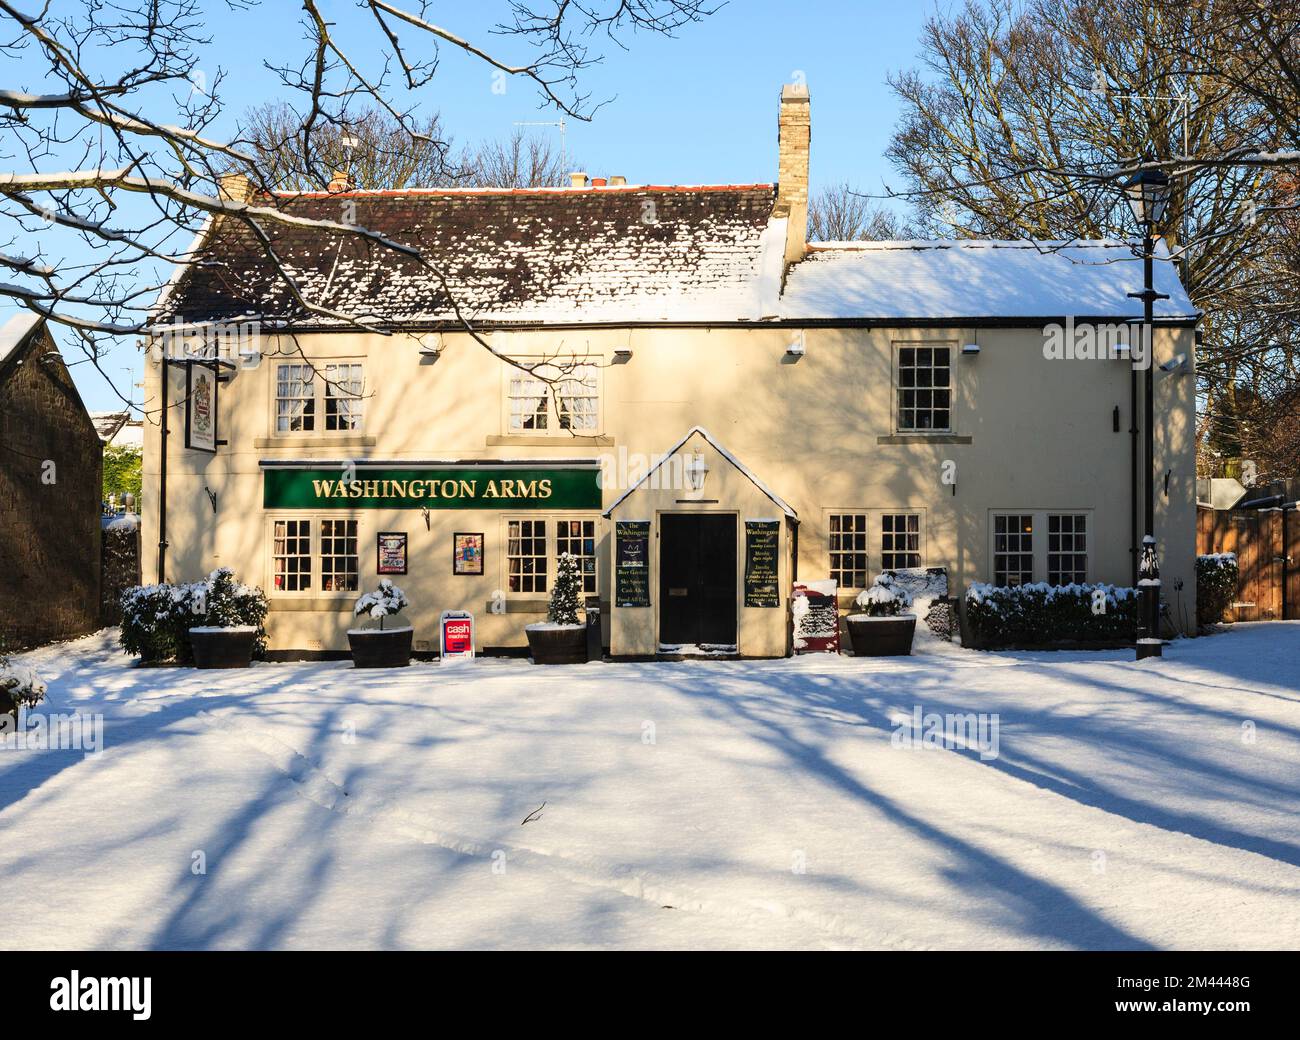 The Washington Arms public house located on The Green within Washington Village, seen in wintertime. Tyne and Wear, England, UK Stock Photo